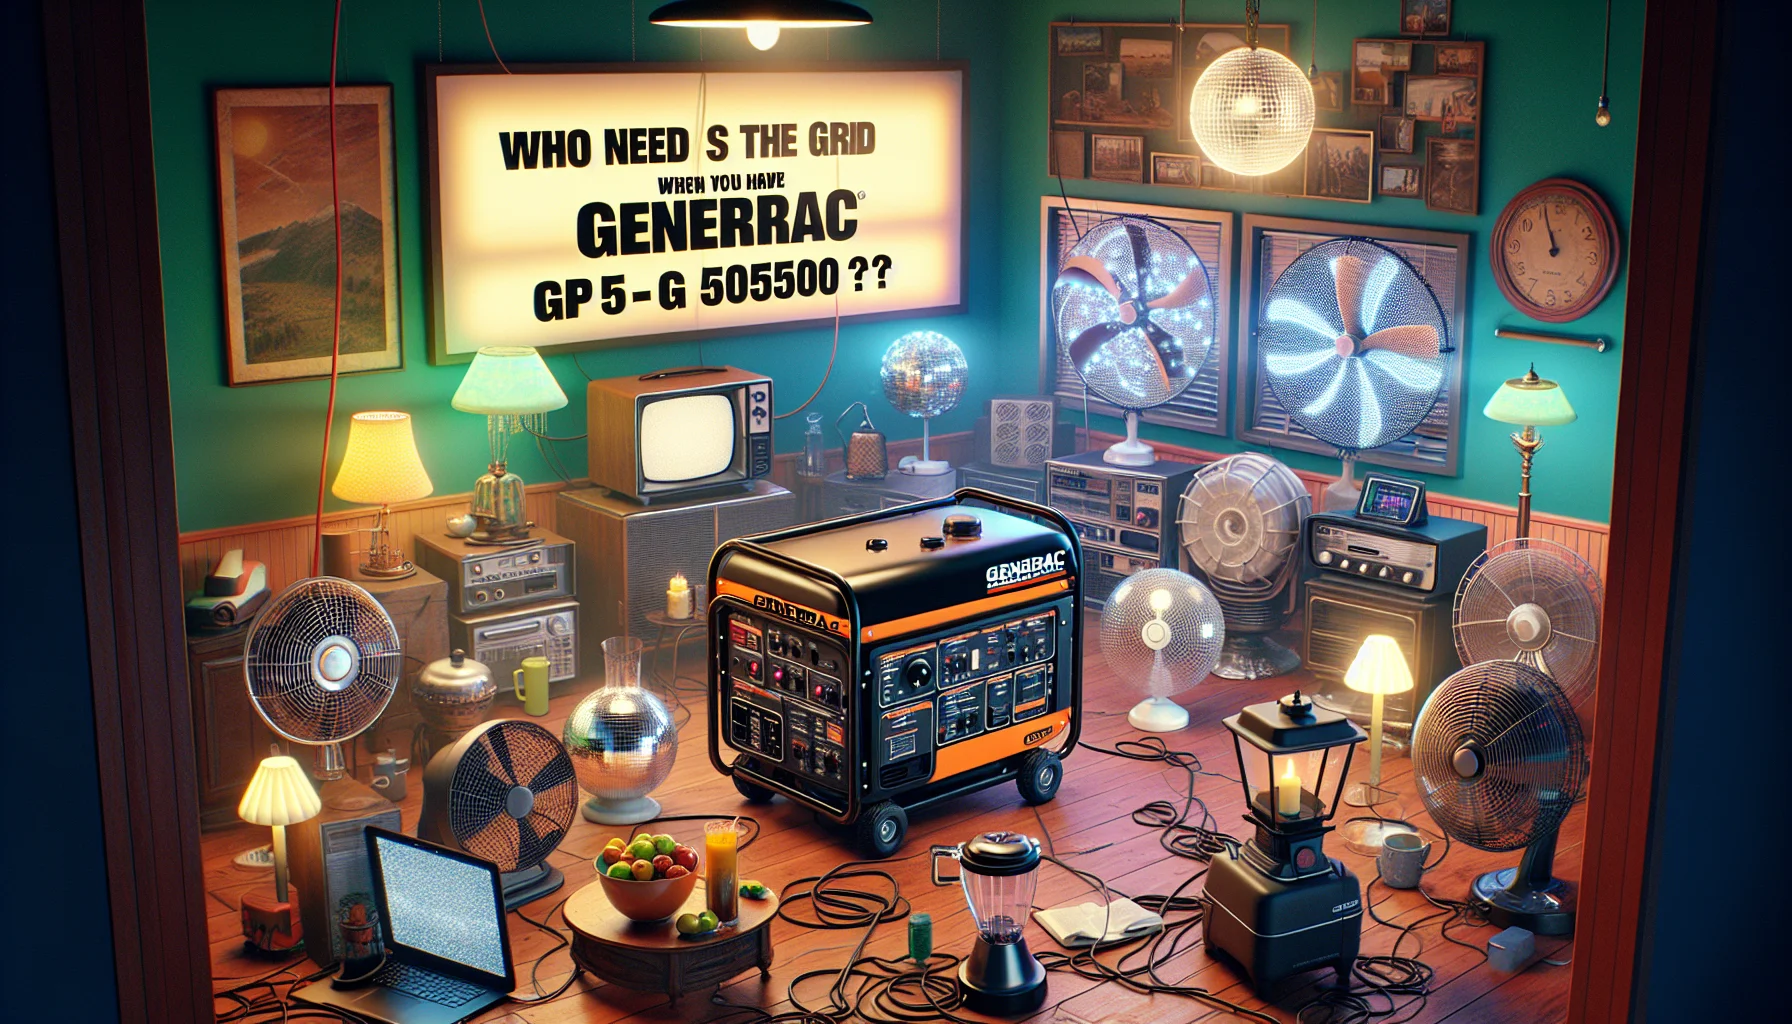 Render a comical, realistic scene involving a Generac GP5500 Portable Generator. The generator sits in the middle of a living room, powering an absurdly large number of various household gadgets such as multiple floor fans, a disco ball, large flat screen TV, blender, and even an antique standing lamp, all running at the same time. The room is aglow with twinkling lights from the electronics and basking in the oddly harmonious whir of the different devices. A catchy, bold caption that reads 'Who needs the grid when you have Generac GP5500?' floats above the scene.